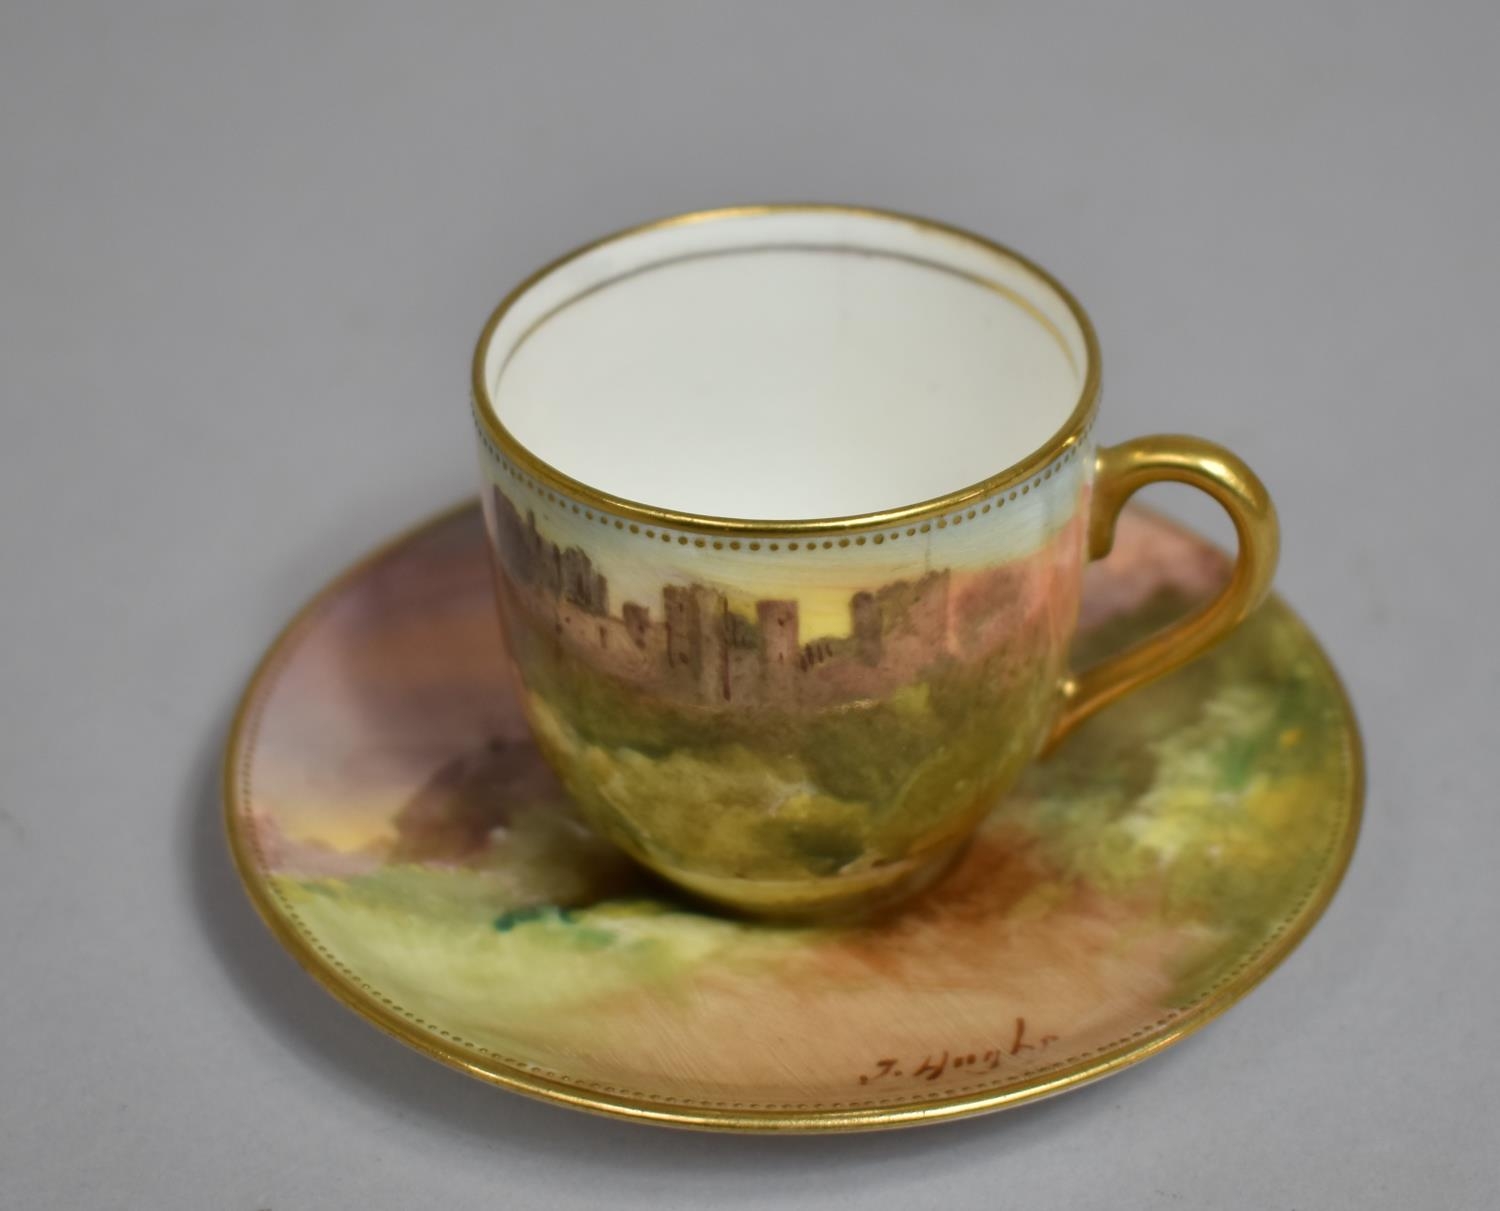 A Miniature Royal Doulton Cabinet Cup and Saucer, Hand Painted Ludlow Castle Design by J Hughes - Image 2 of 3